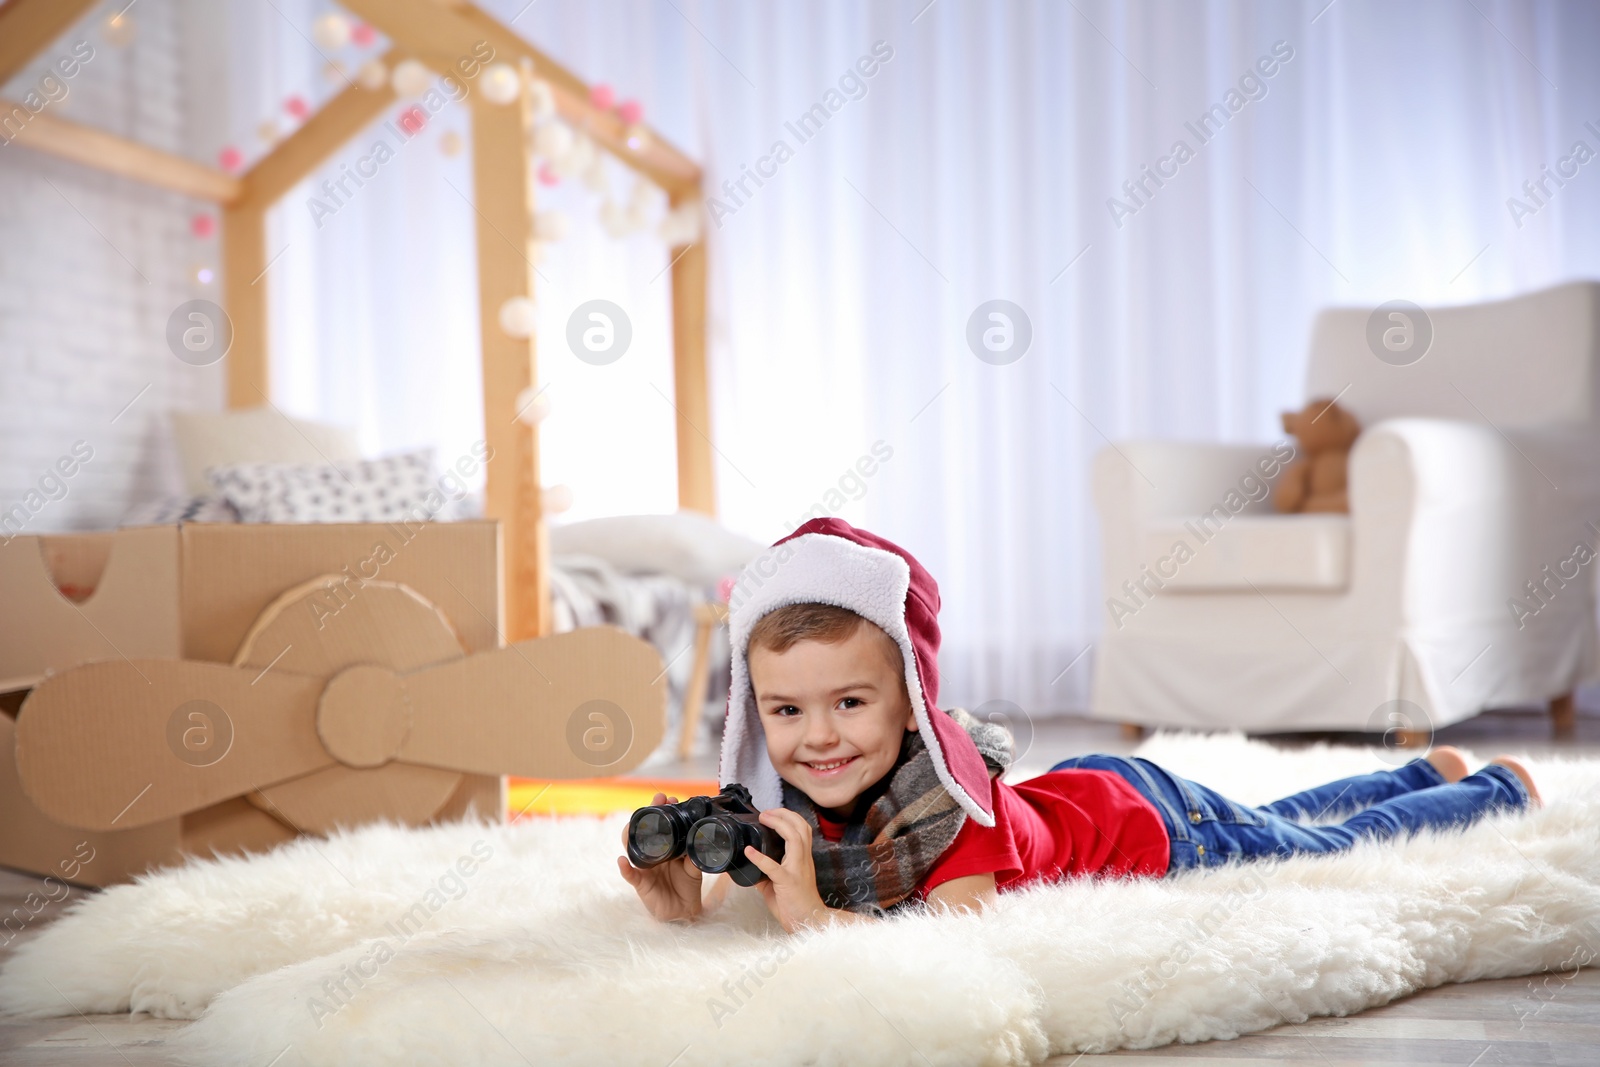 Photo of Cute little boy playing with binoculars and cardboard airplane in bedroom